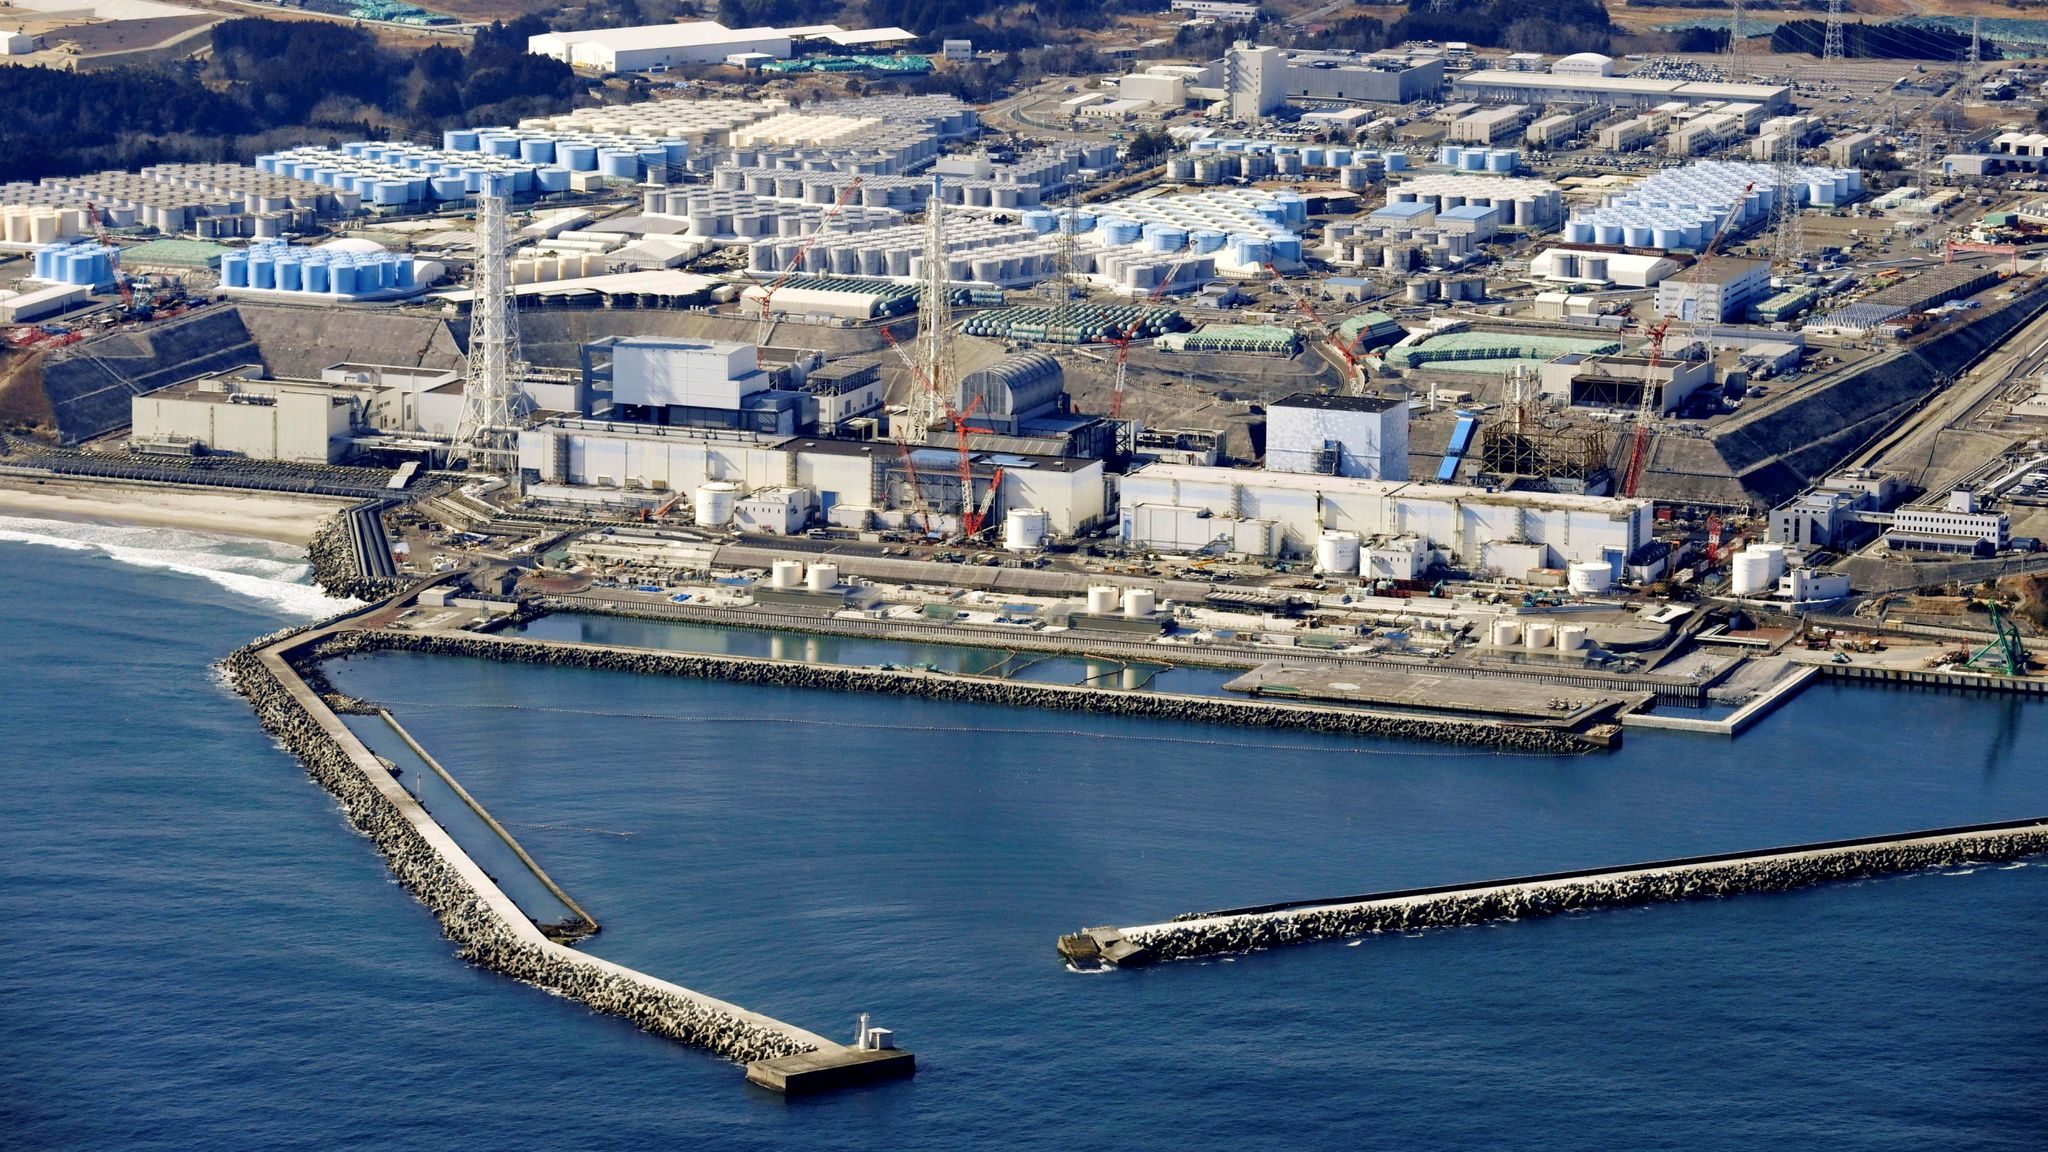 Fukushima Japan to release more than one million tonnes of radioactive